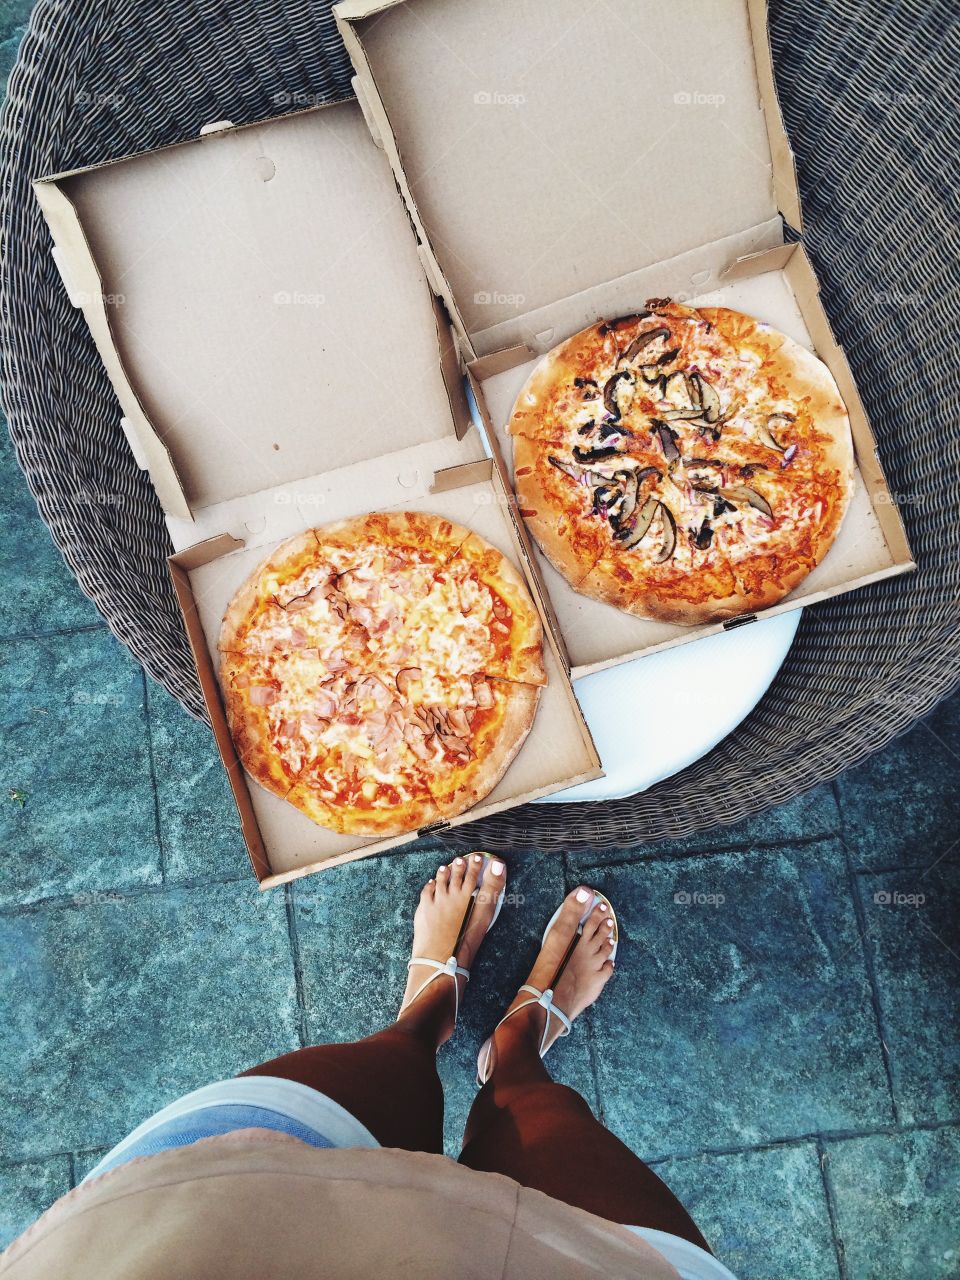 The summer time with favorite pizza